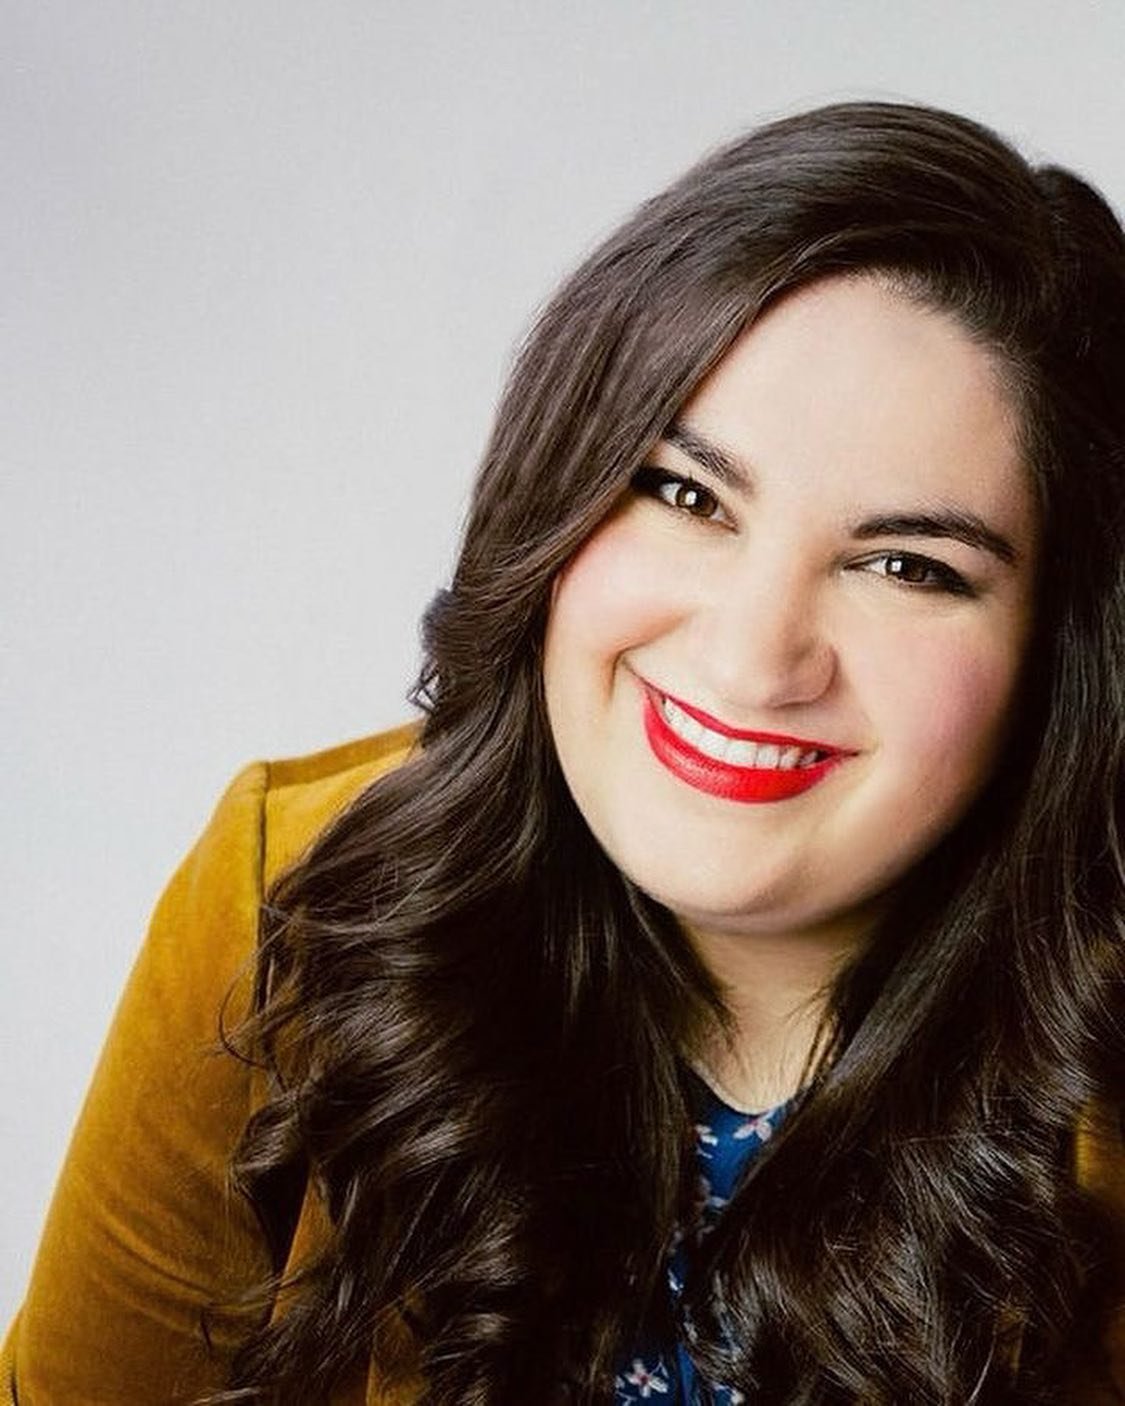 Spotlight on OCU Alum Liz Lang ⭐️ Known for her crossover abilities throughout multiple genres, Opera News has applauded soprano Liz Lang for her &ldquo;comedic timing and clear resonant tone.&rdquo; This Sunday 3/10, Liz brings her recital &ldquo;Pr